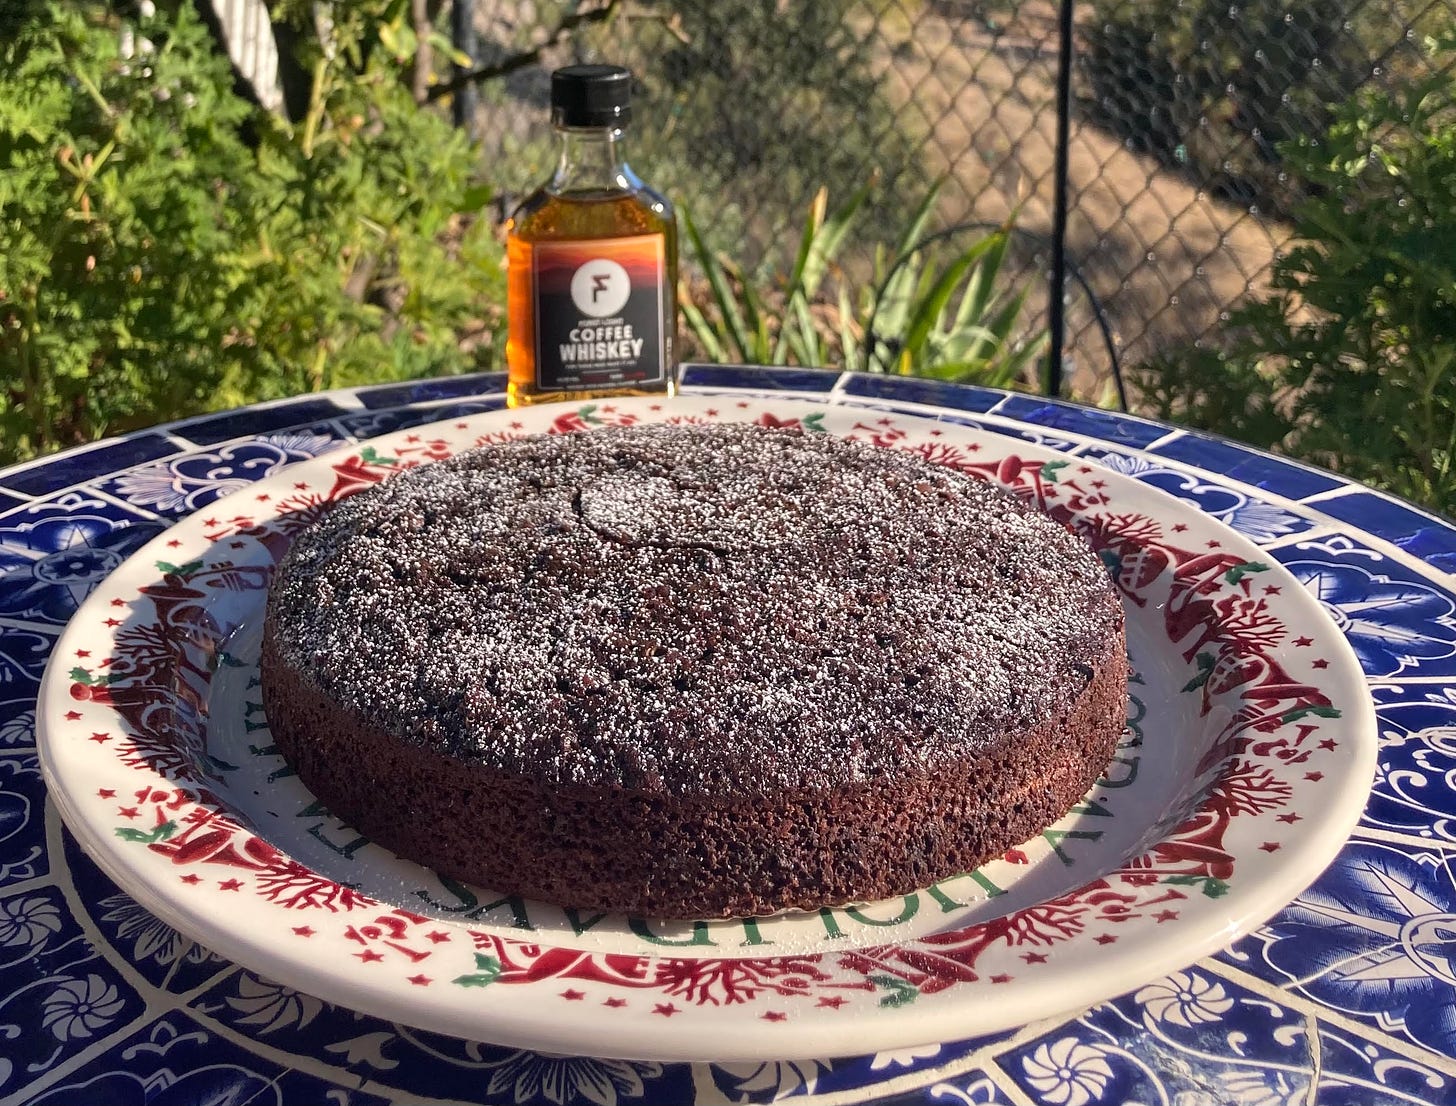 A flat, round chocolate cake dusted with confectioner's sugar on a white plate with a ring of red Christmas decorations around the edge. A bottle of First Light Coffee Whiskey is on the table just beyond the cake. The table is blue with a white floral pattern. Outside. Close-up photo.